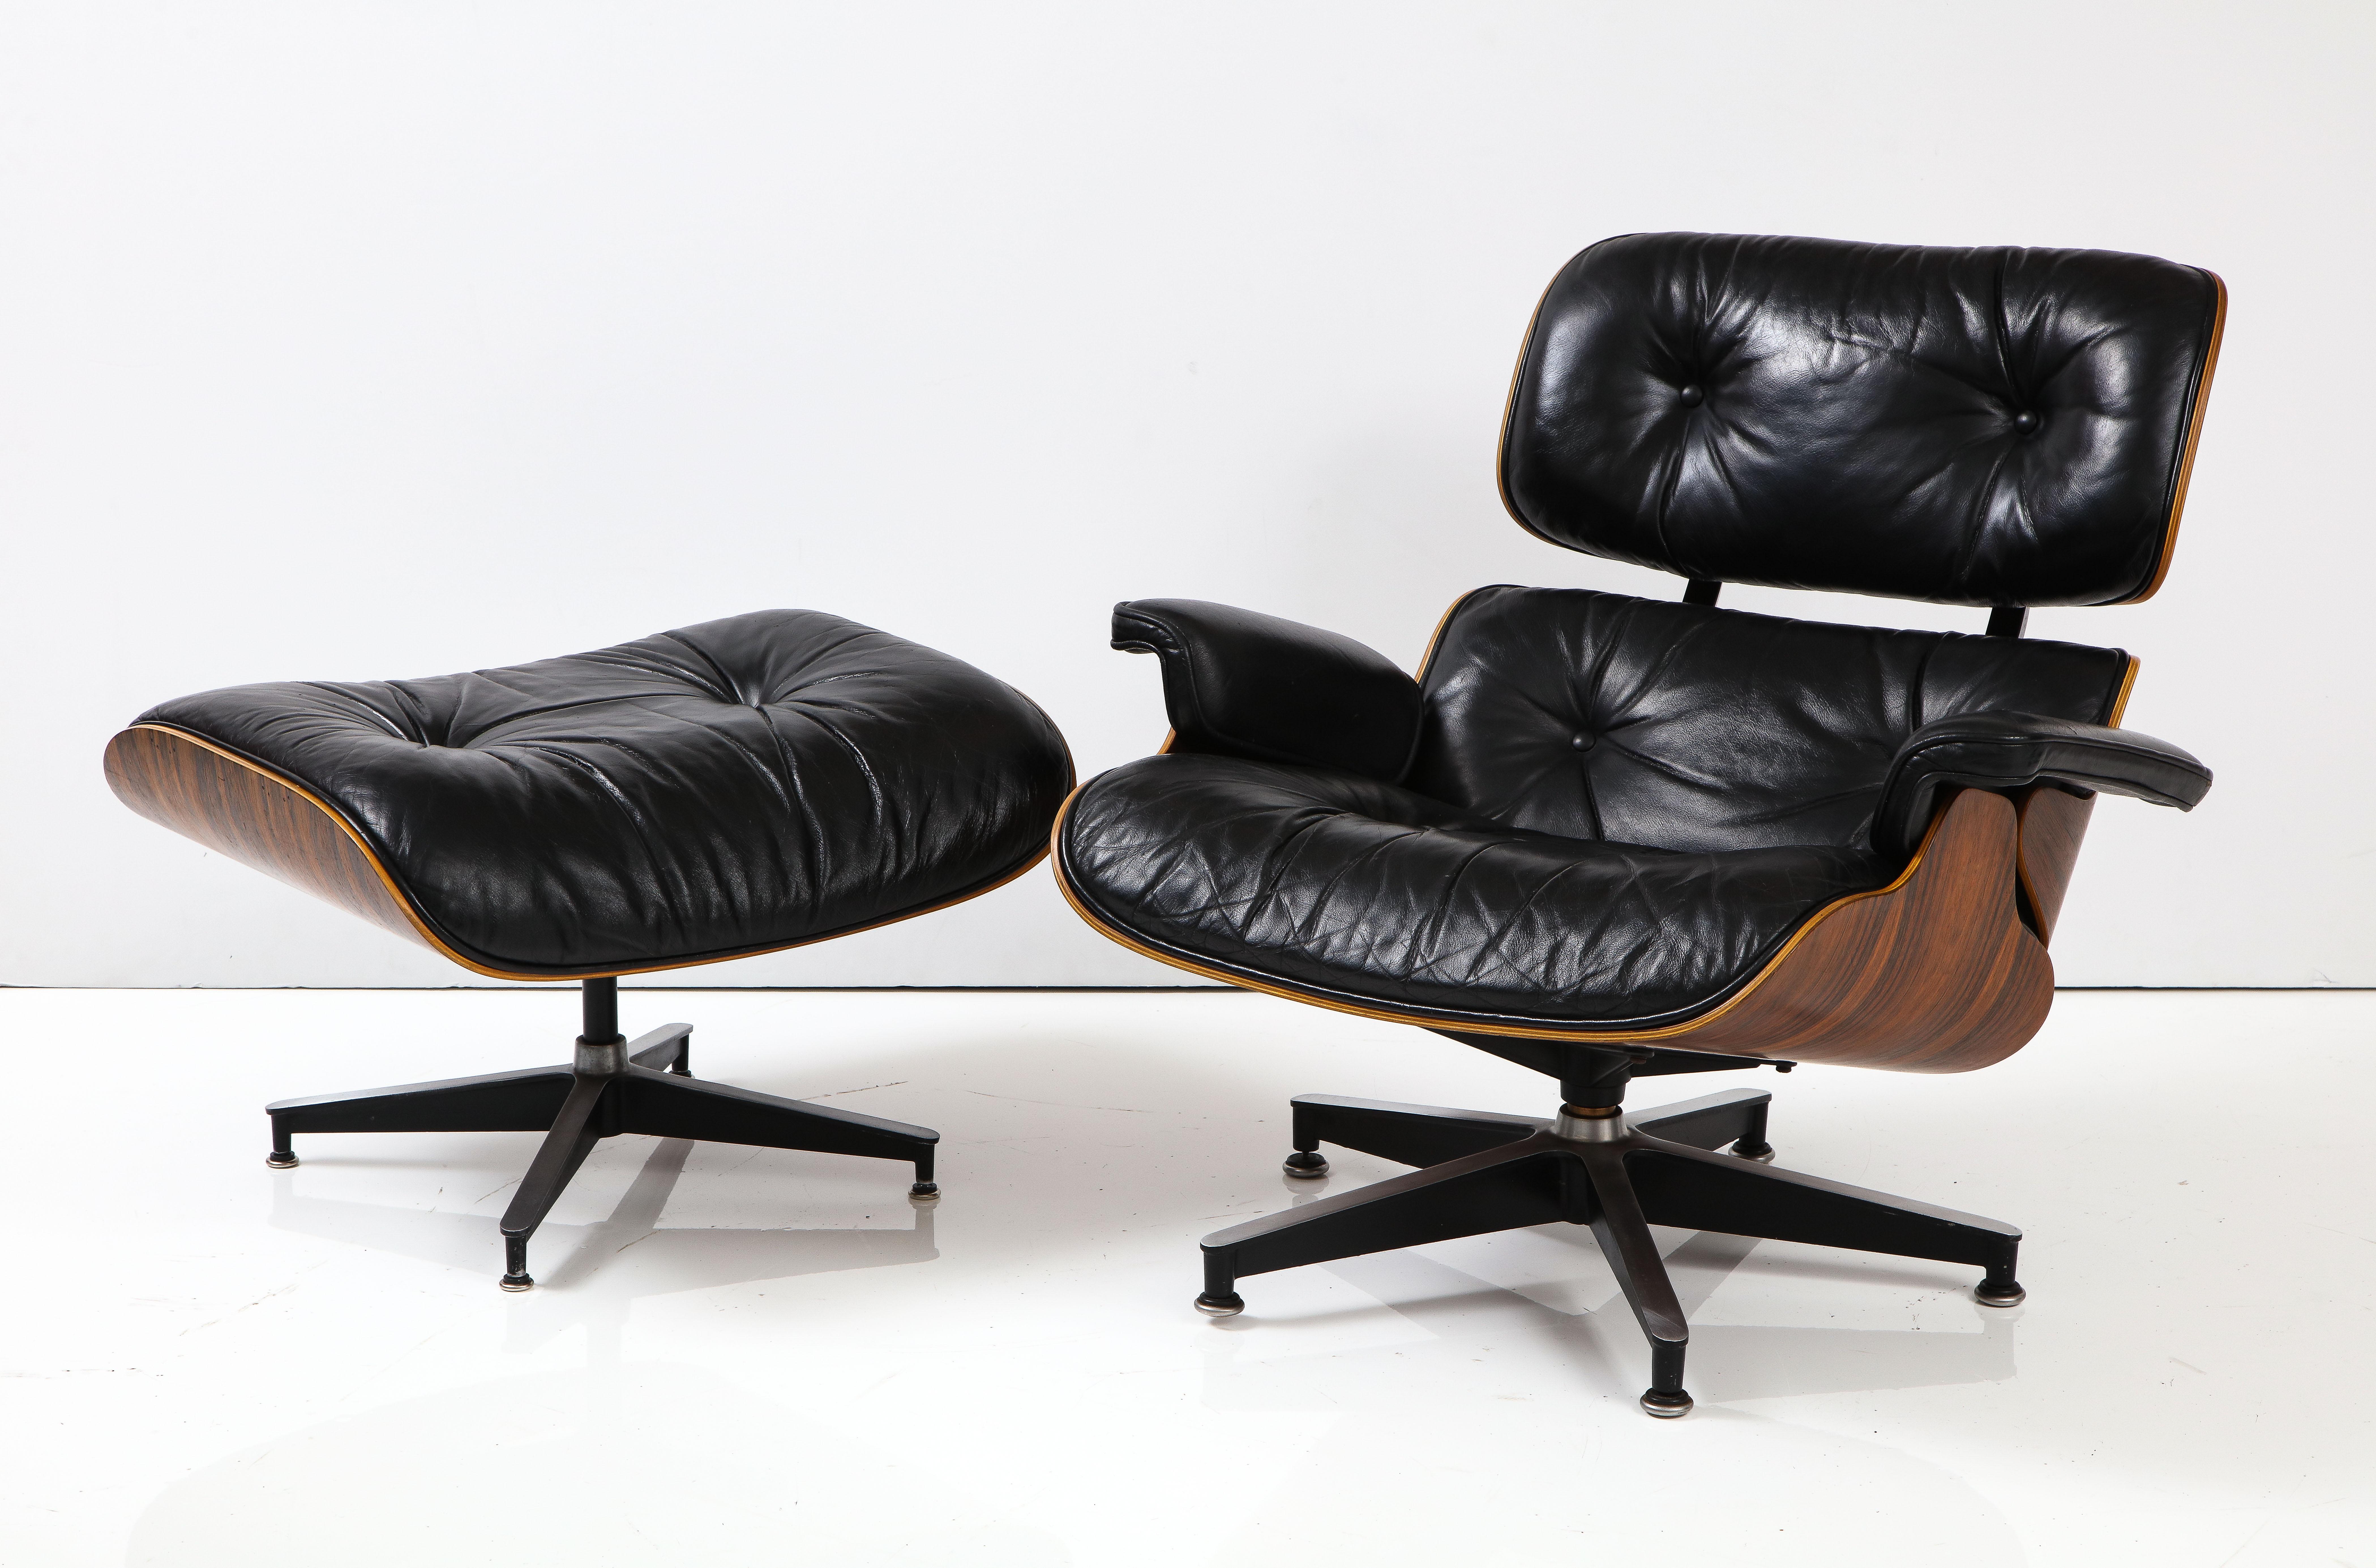 Stunning 1970's Mid-Century Modern Eames Brazilian rosewood and leather lounge chair and ottoman made by Herman Miller, purchased from the original owner who got it in 1971, in vintage original condition with some wear and patina to the to the